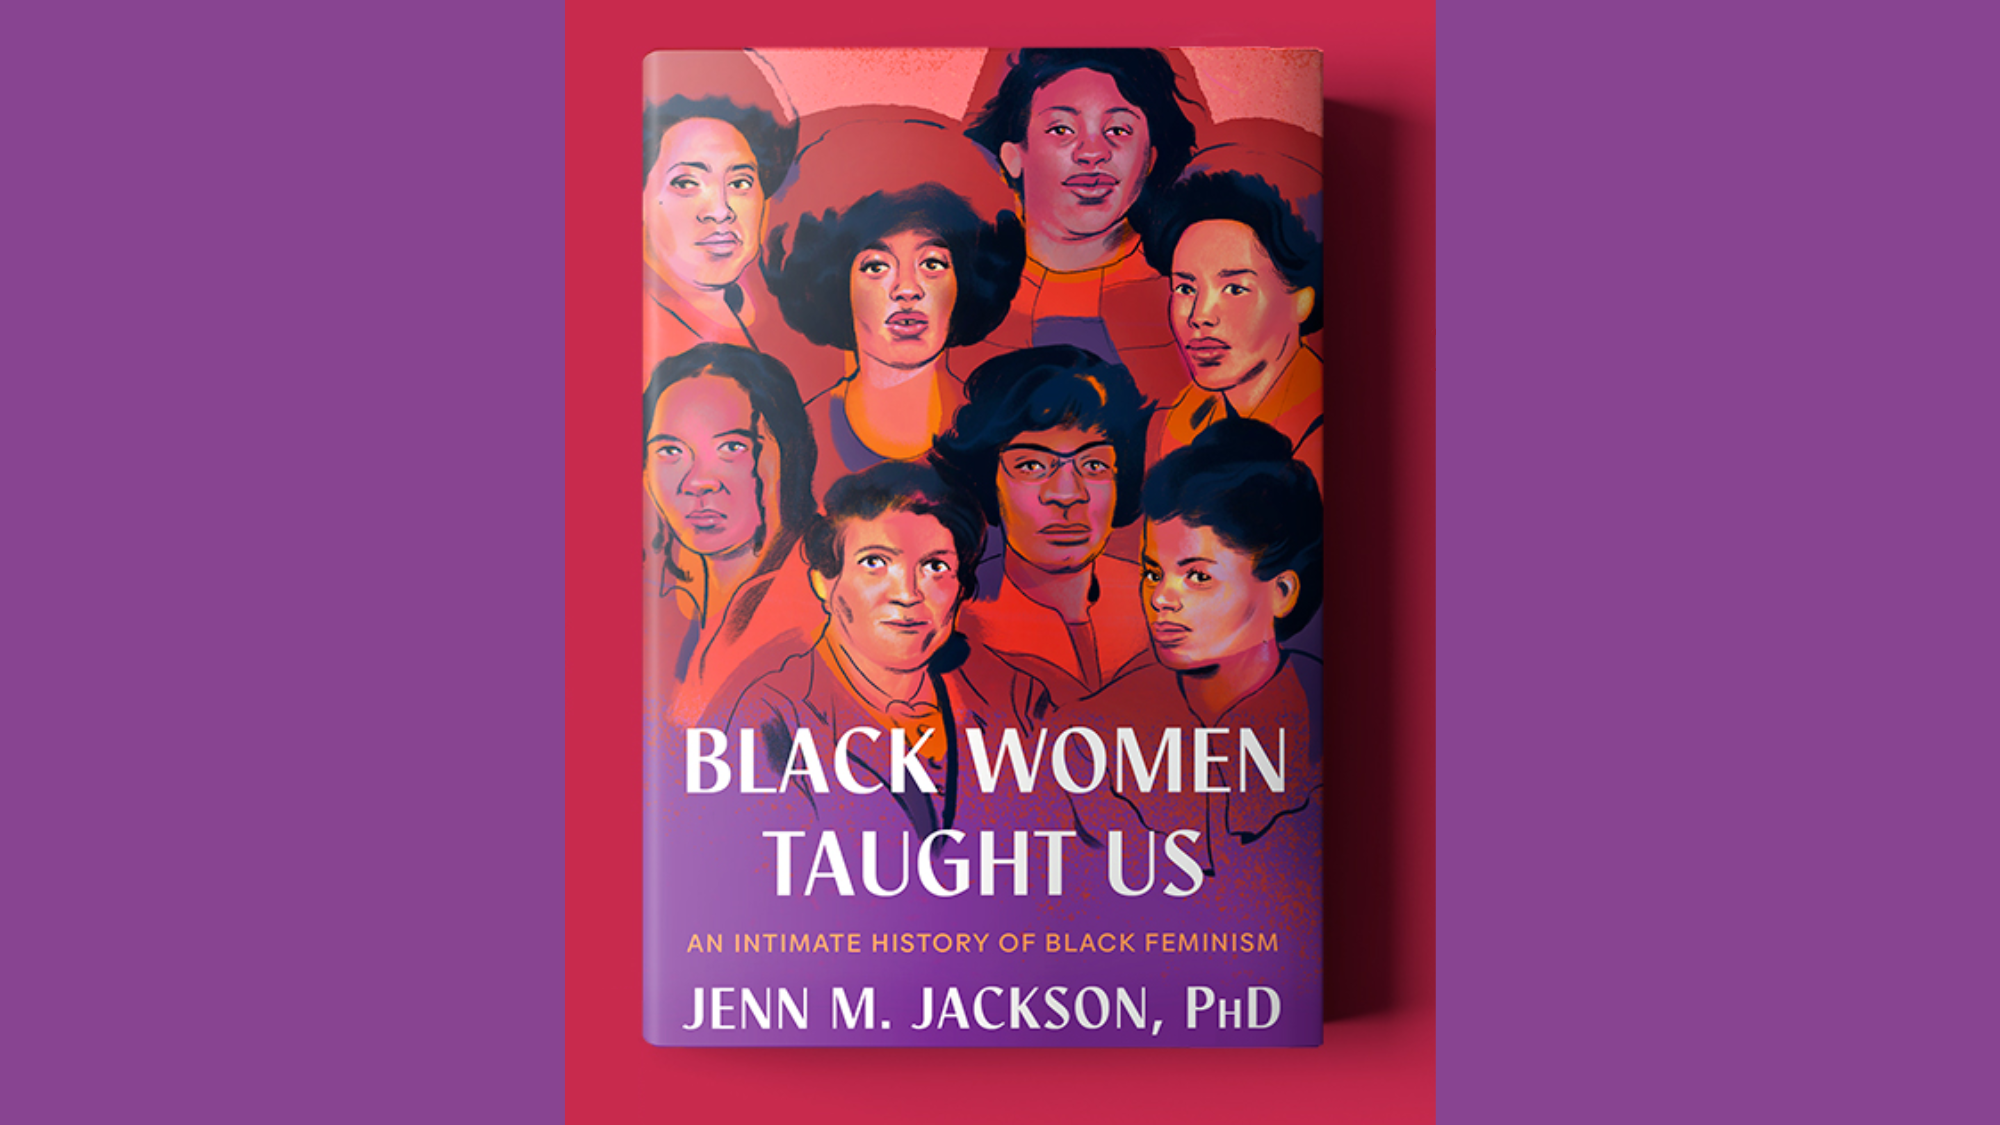 This New Book Is A Love Letter To Black Women